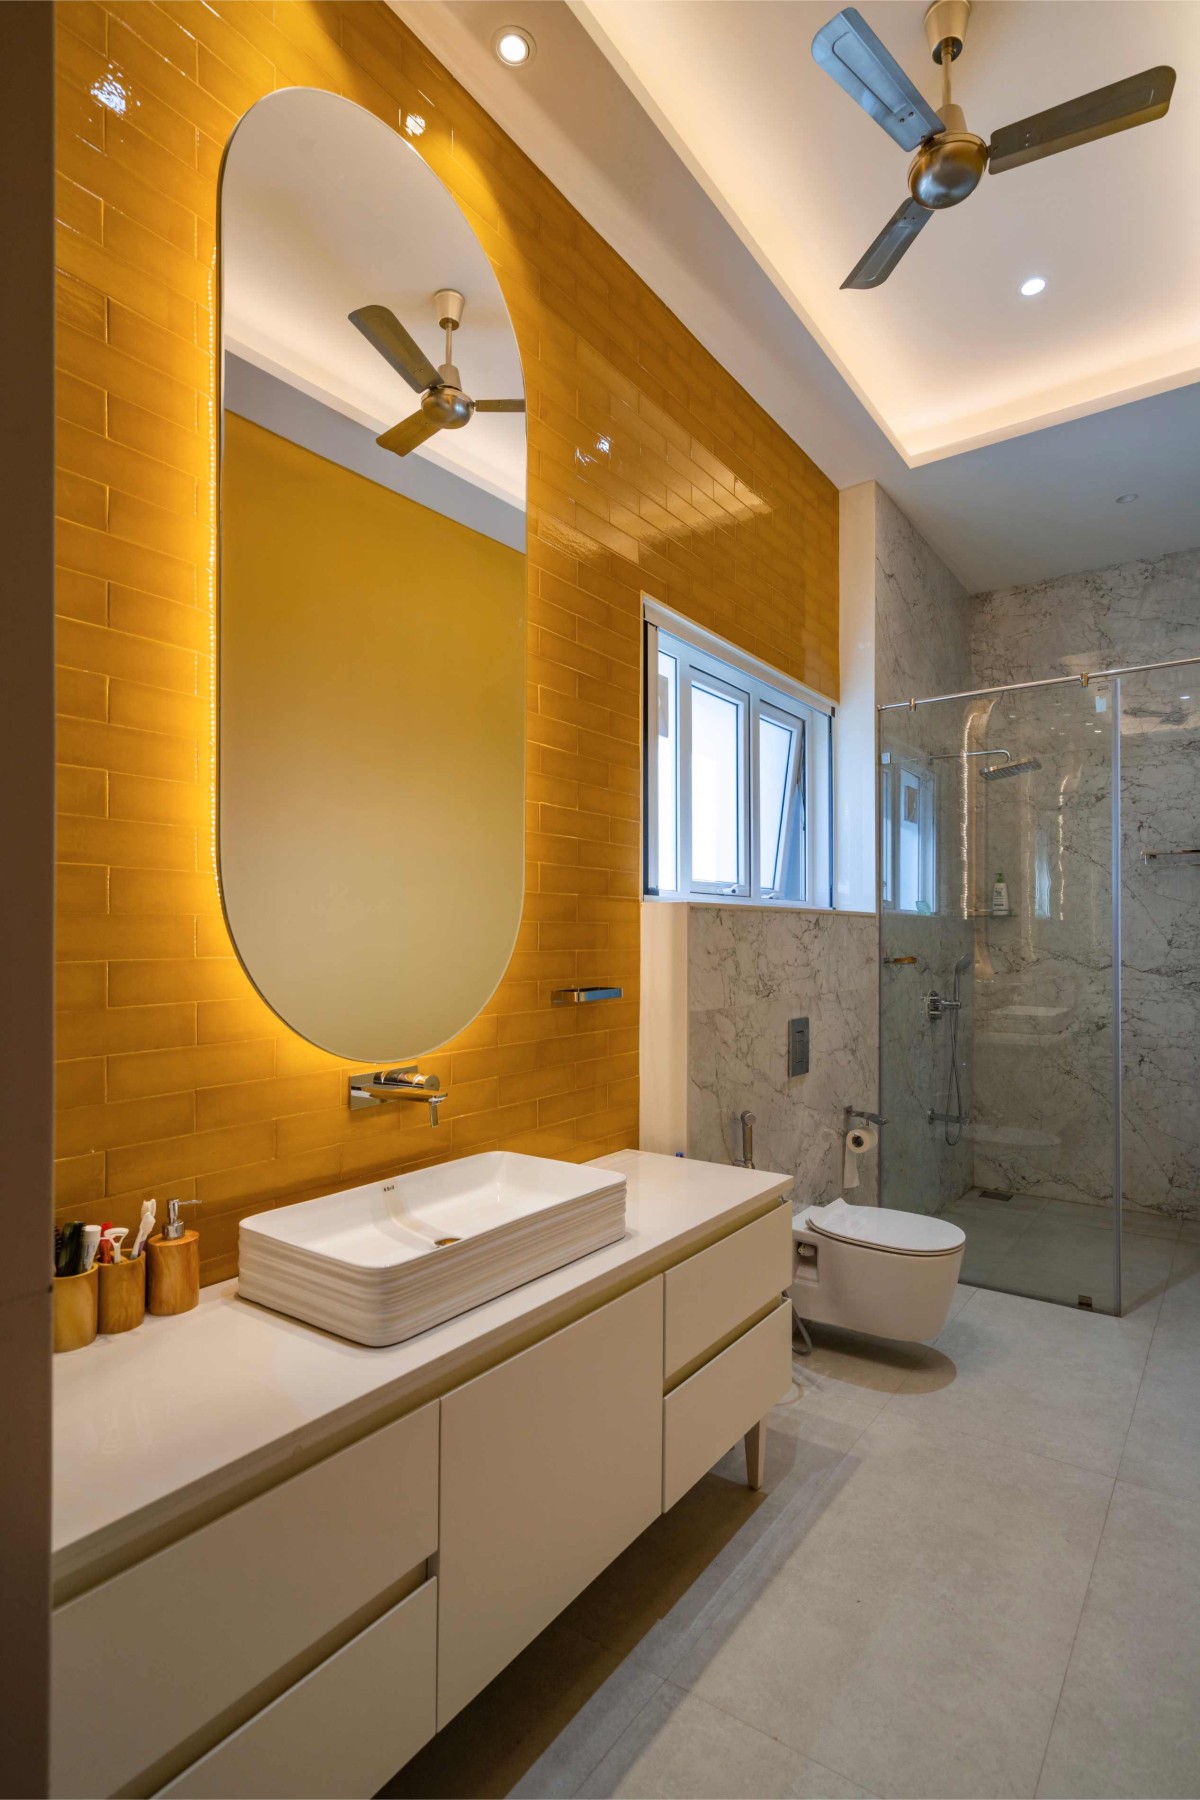 Toilet and Bathroom of Vithalesh Residence by Ace Associates